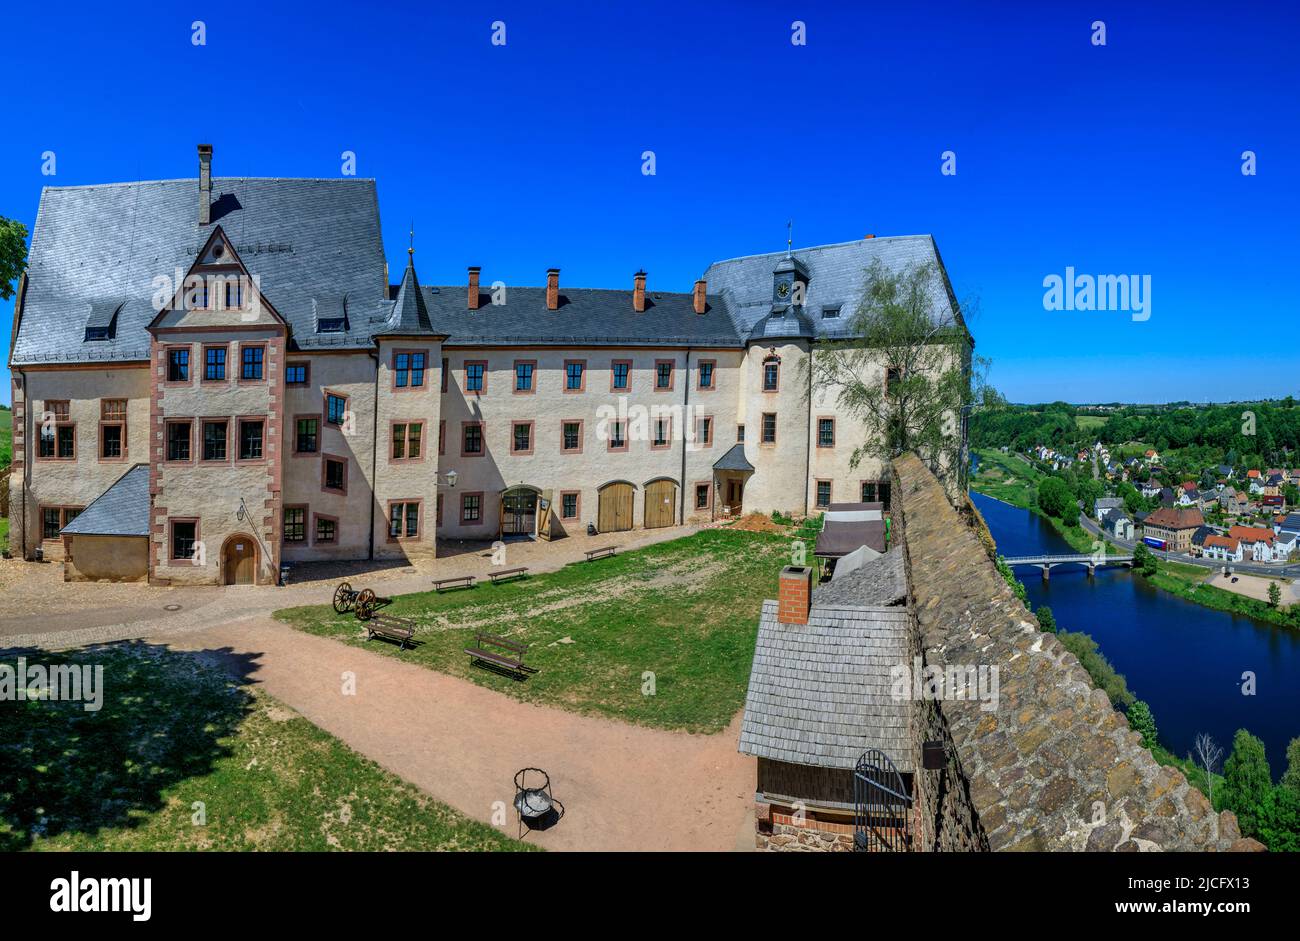 Mildenstein Castle, formerly also called Mildenstein Castle or Leisnig Castle, is located in Leisnig in the Central Saxony district in the Free State of Saxony. Stock Photo